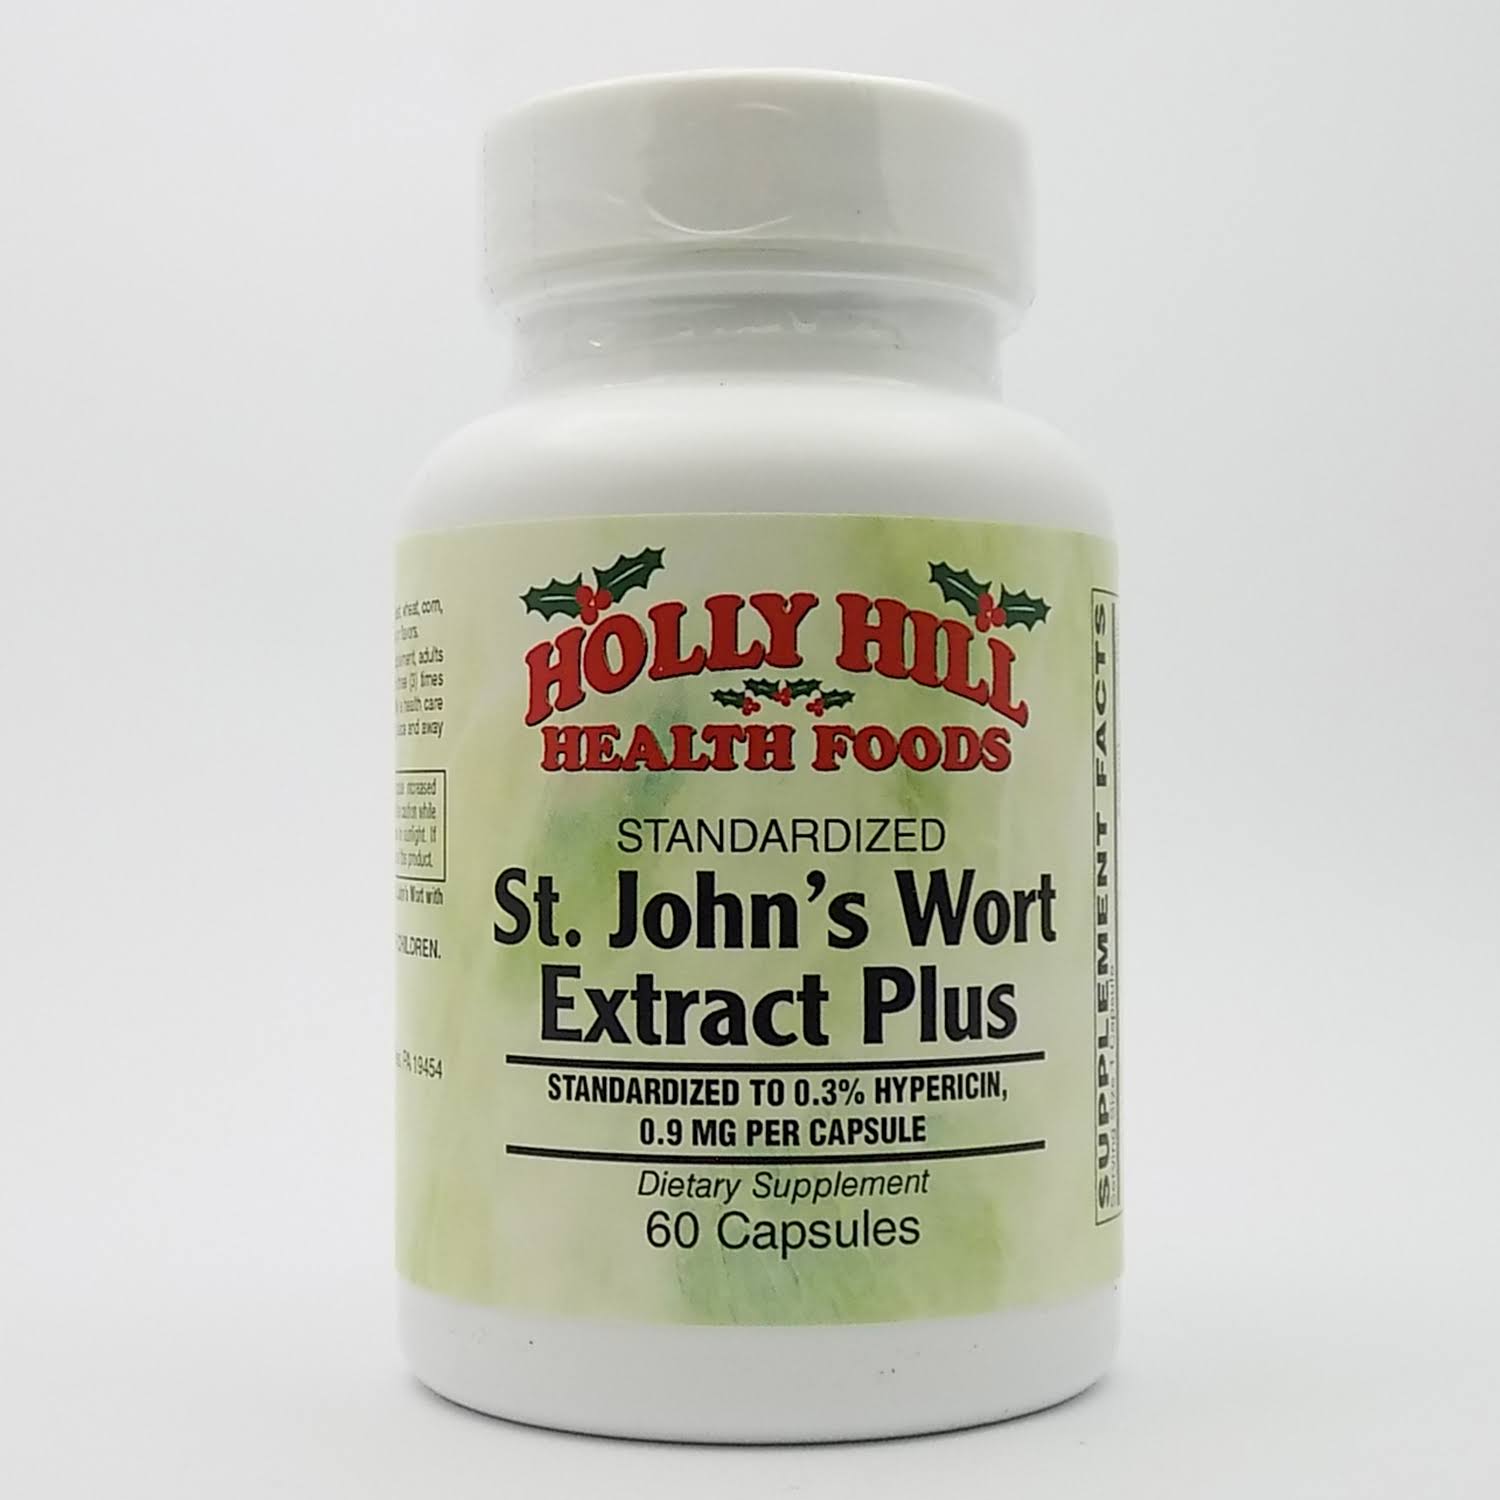 Holly Hill Health Foods, Standardized St. John's Wort Extract Plus, 60 Capsules